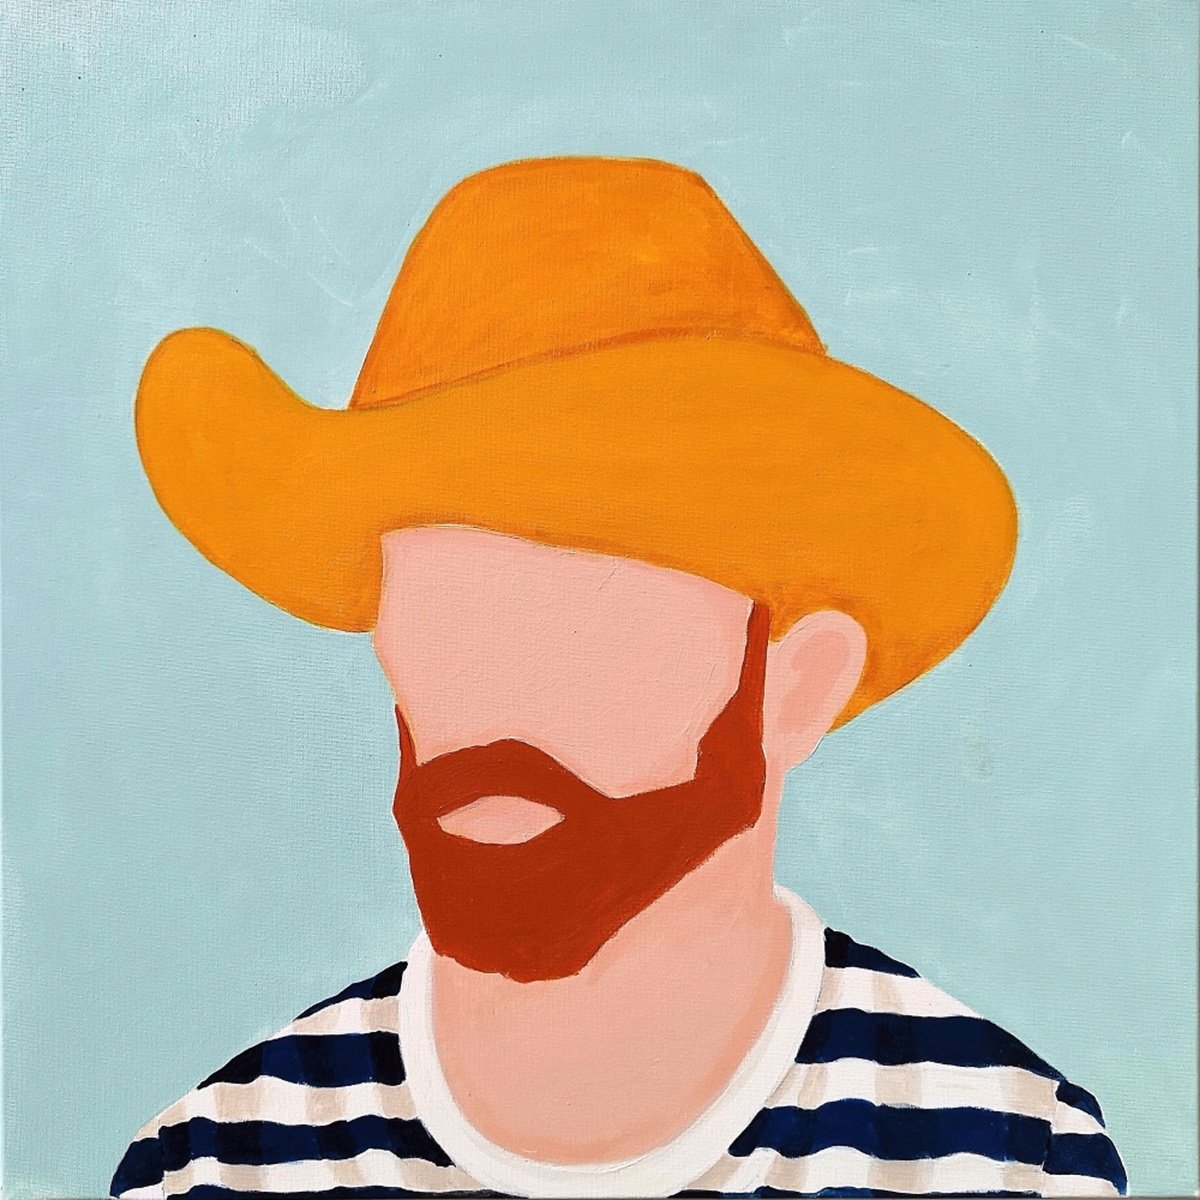 Van Gogh with Straw Hat and Blue Stripes by Marisa An